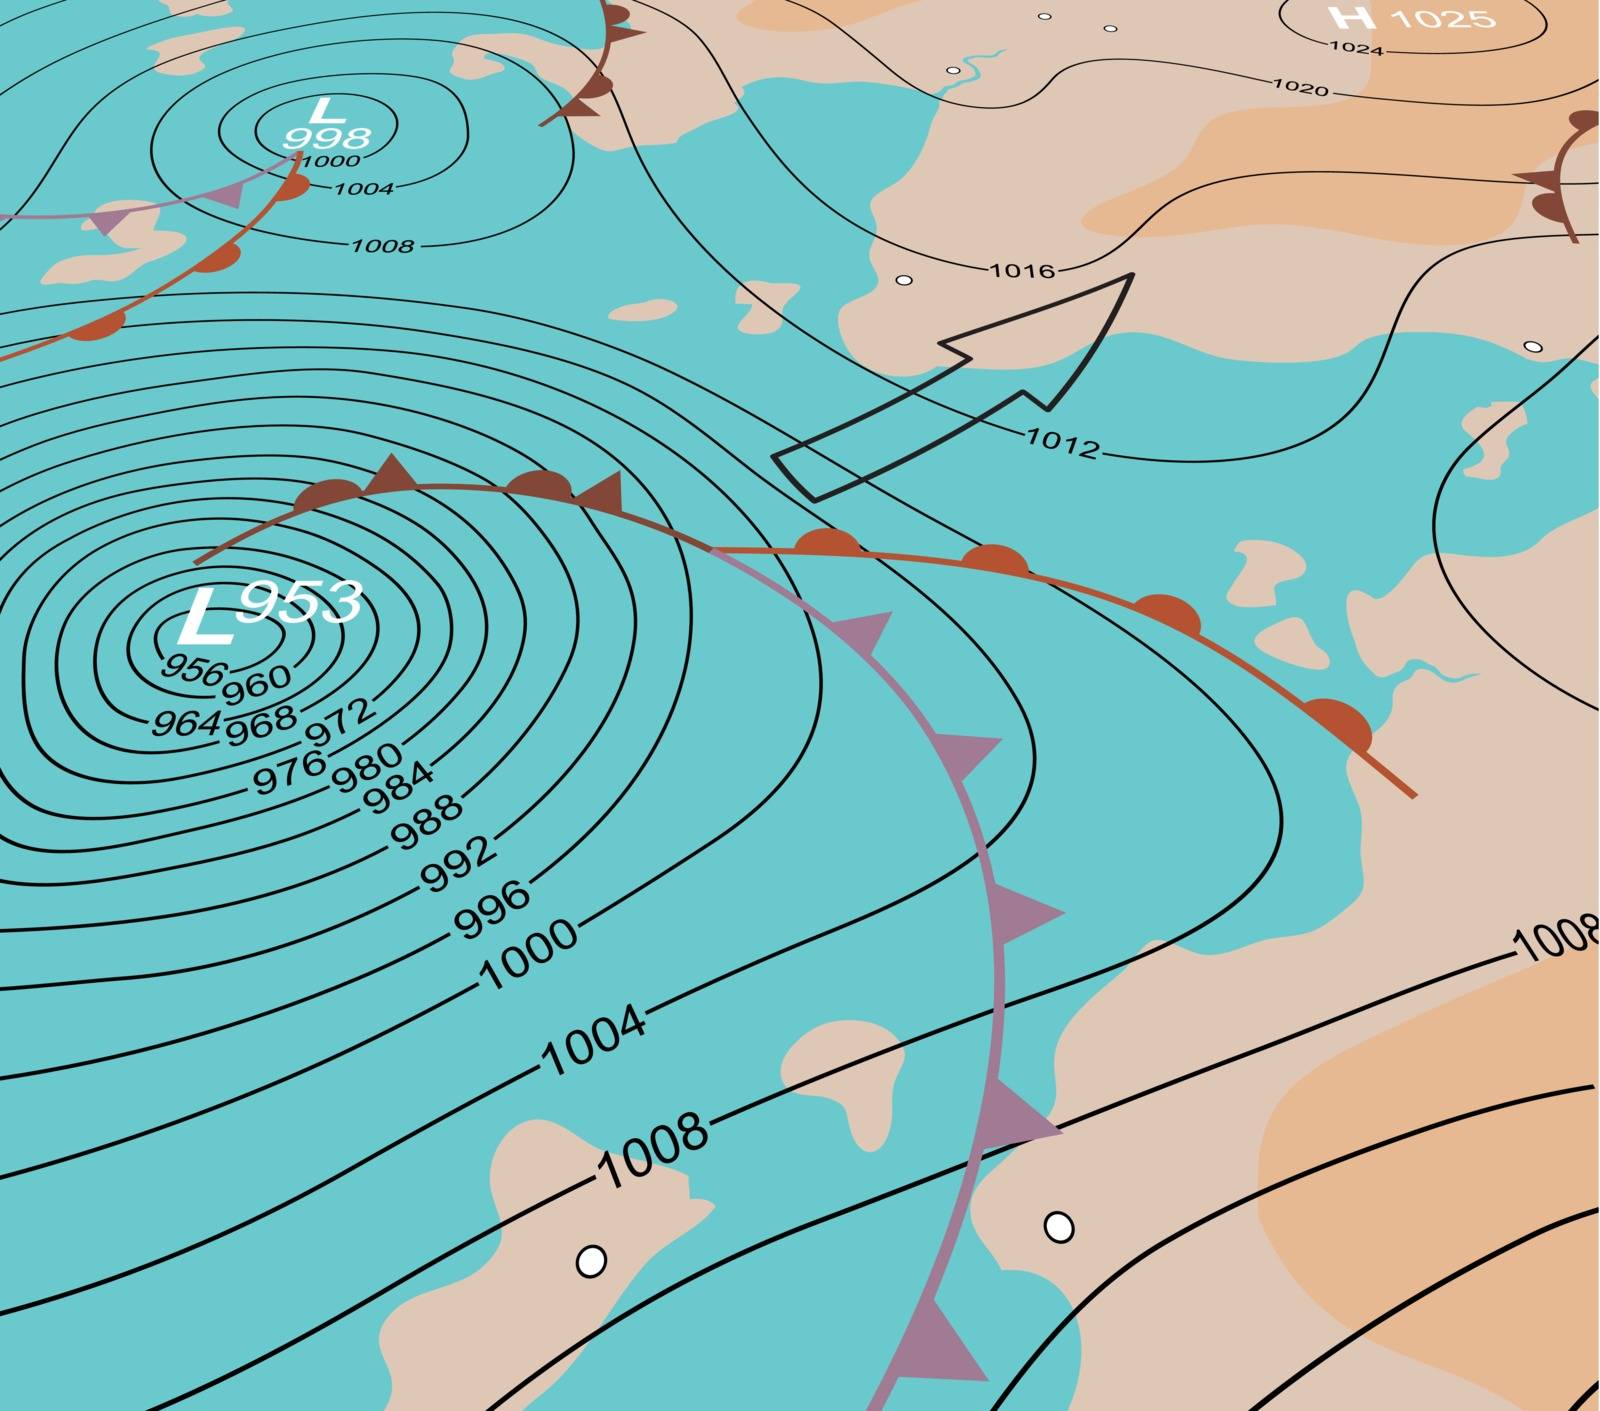 Editable vector illustration of an angled generic weather map showing a storm depression